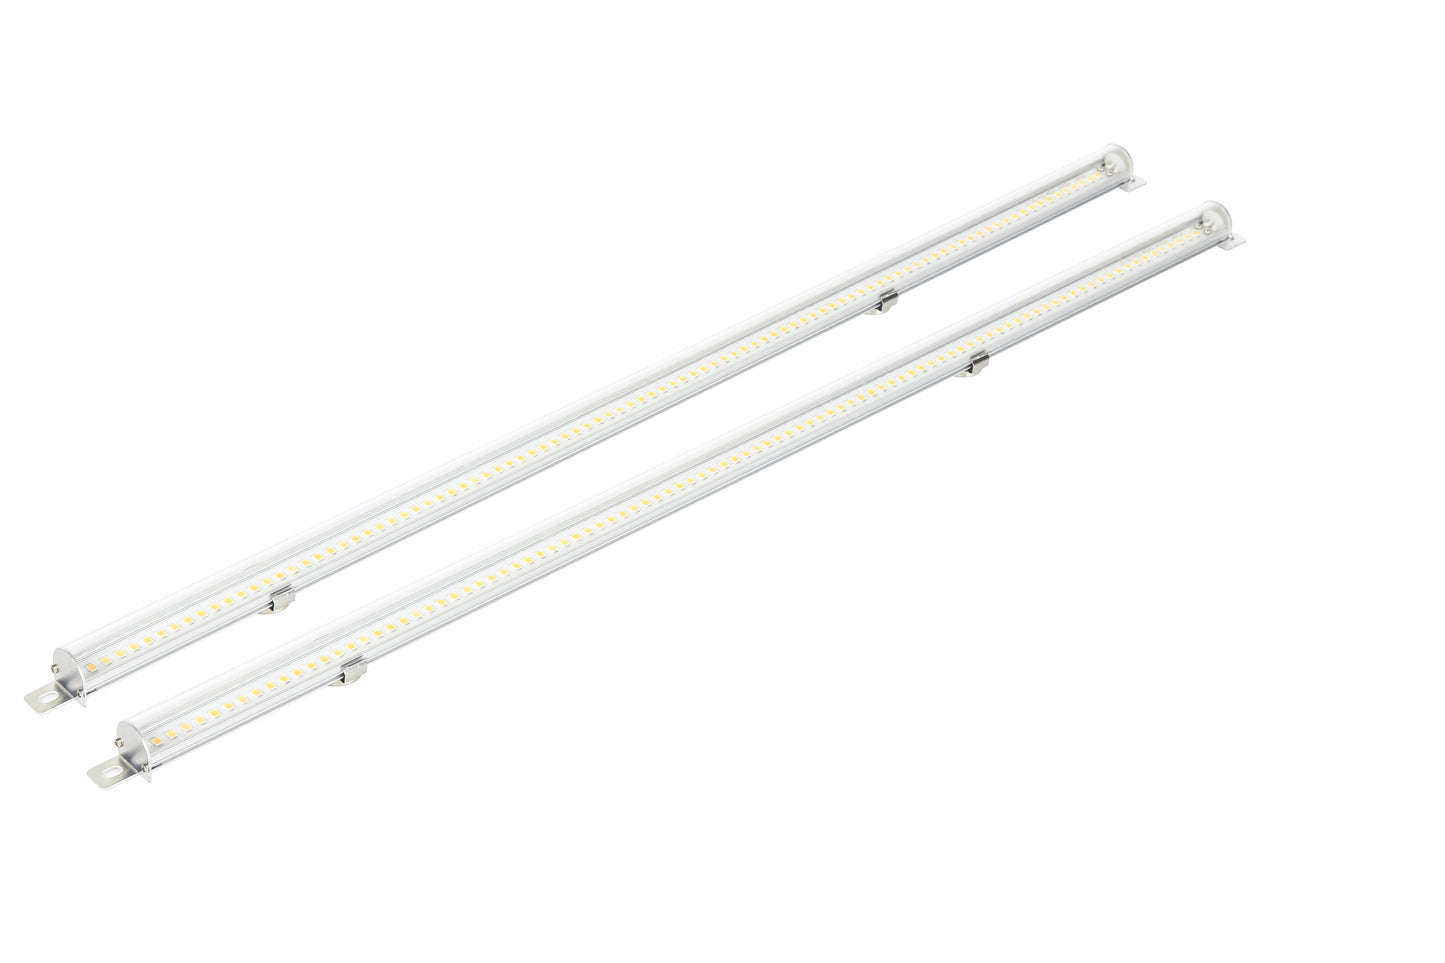 CLEARANCE - 2FT LED Magnetic Retrofit Strip Kit for T8 or T12 Replacement 4000K 3600LM 32W